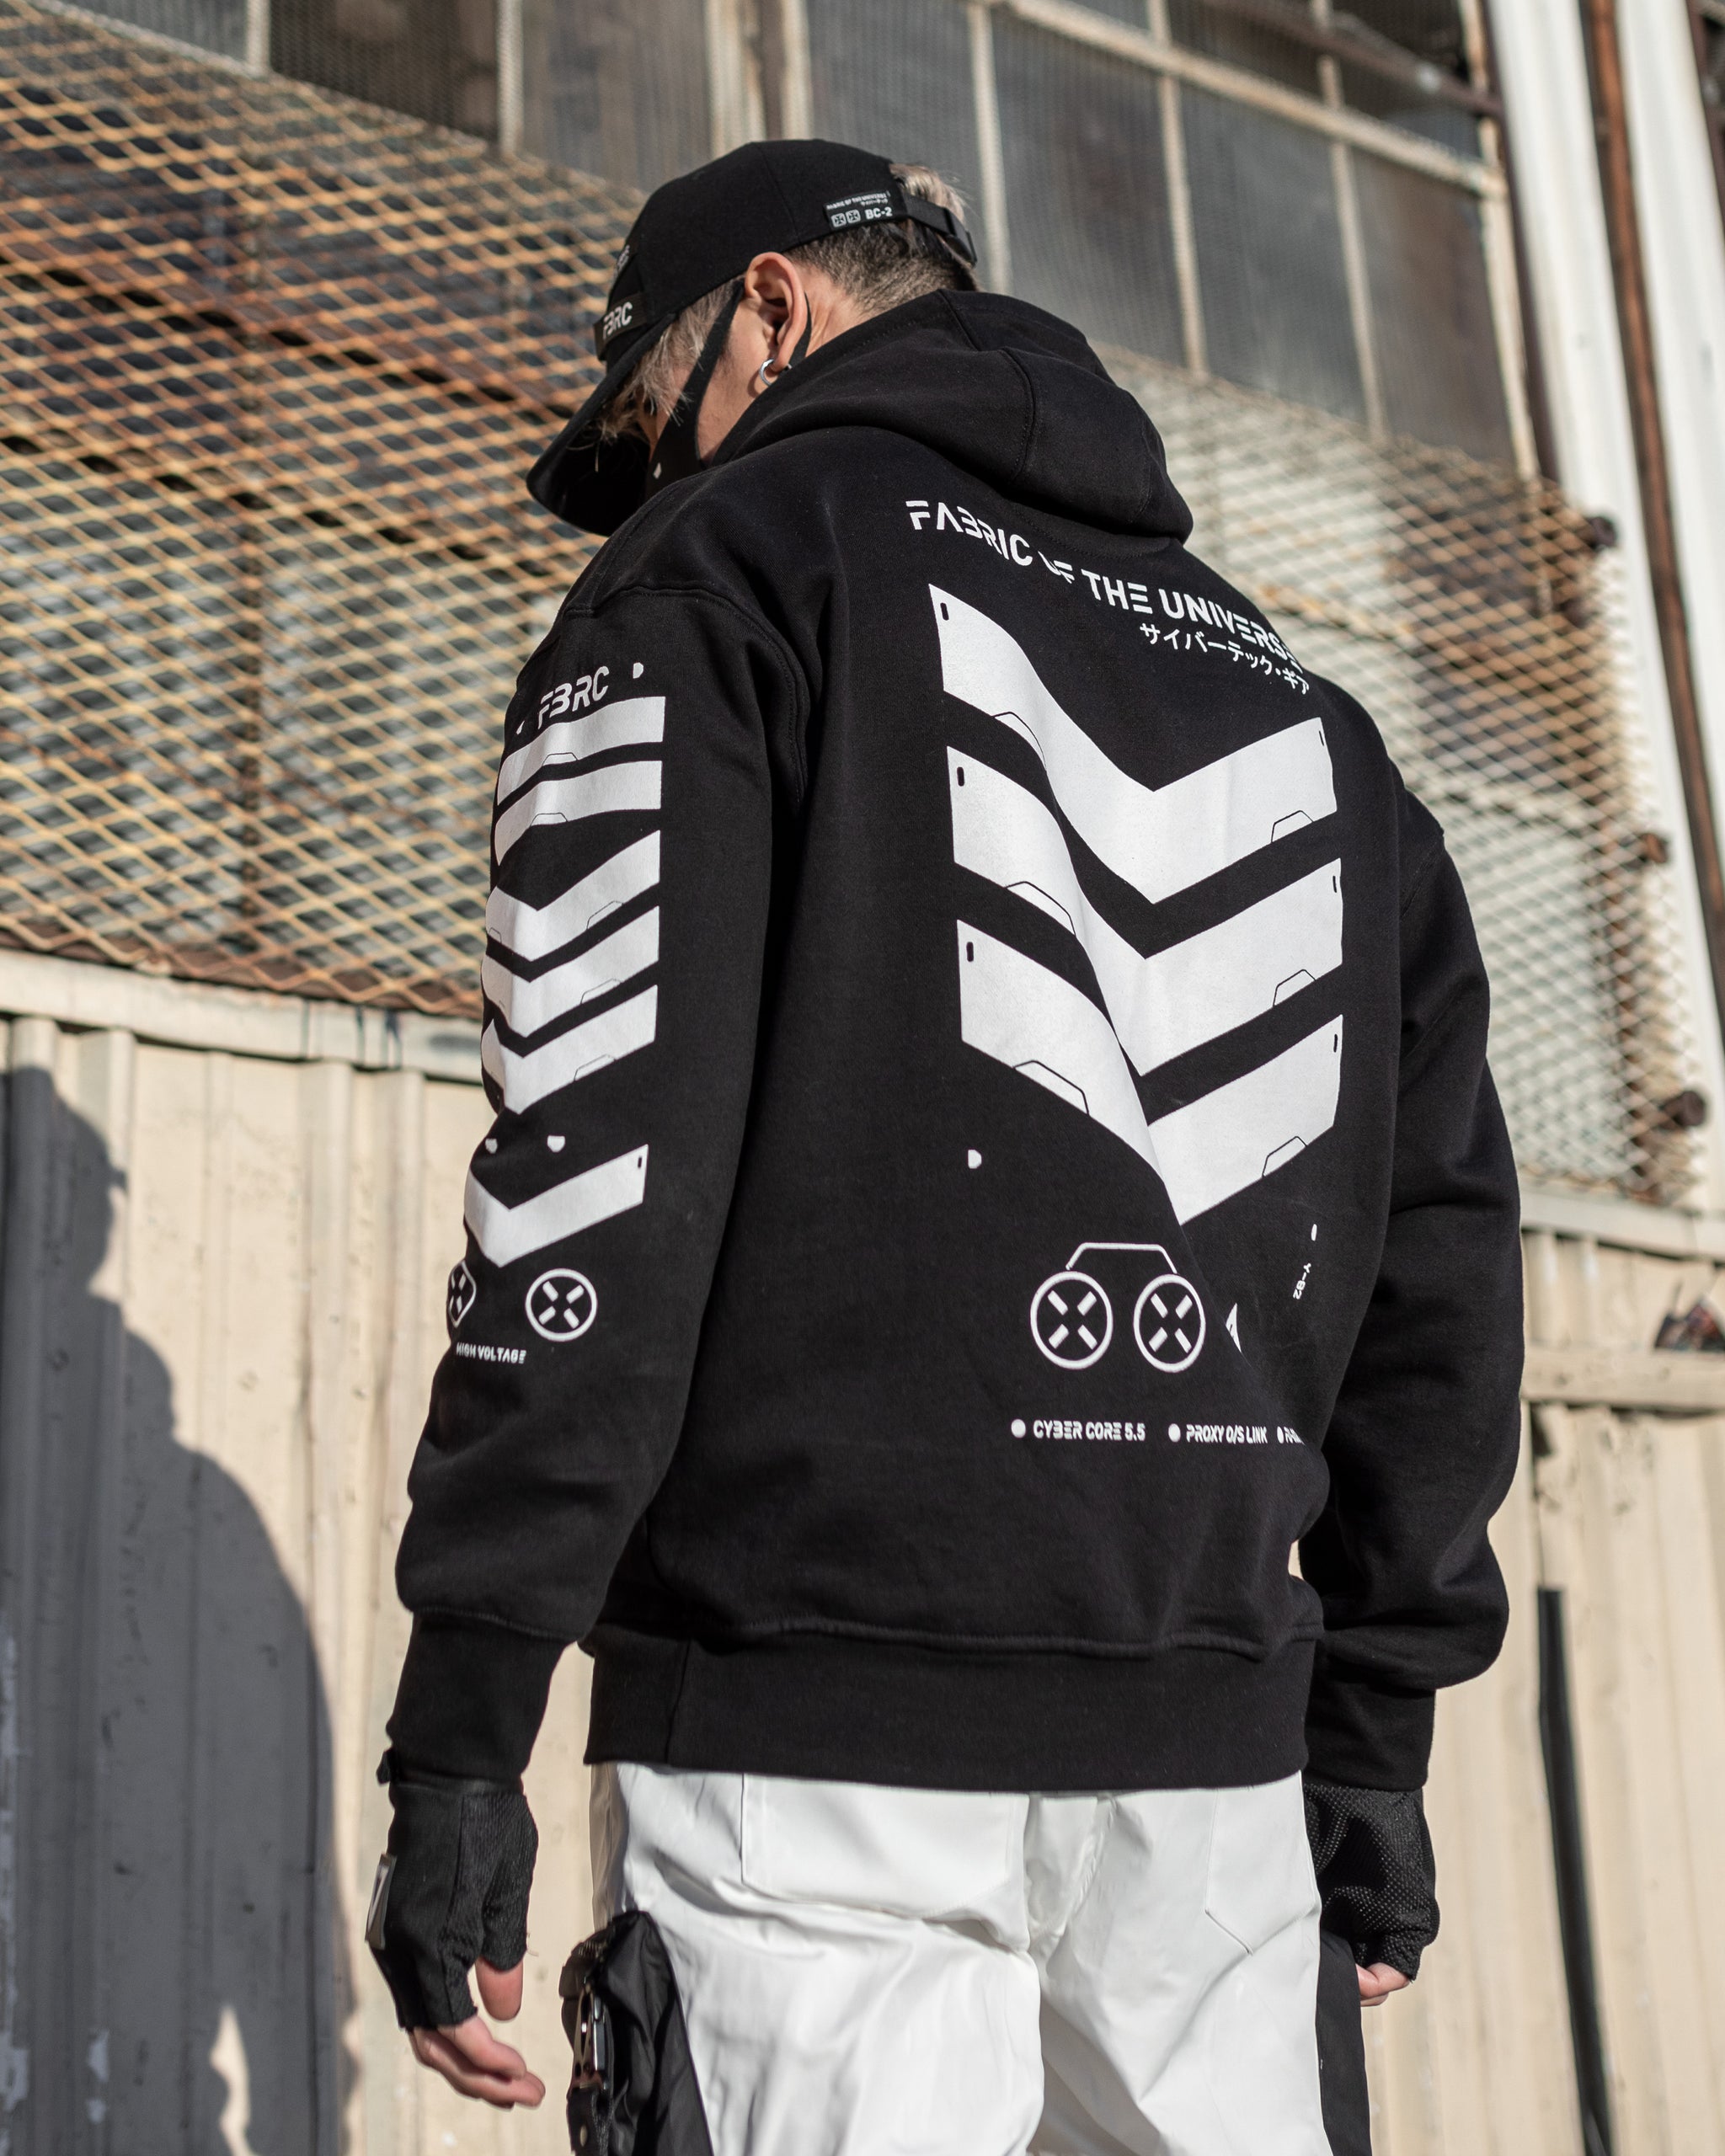 Fabric of the Universe Y-2020 Tech Hoodie